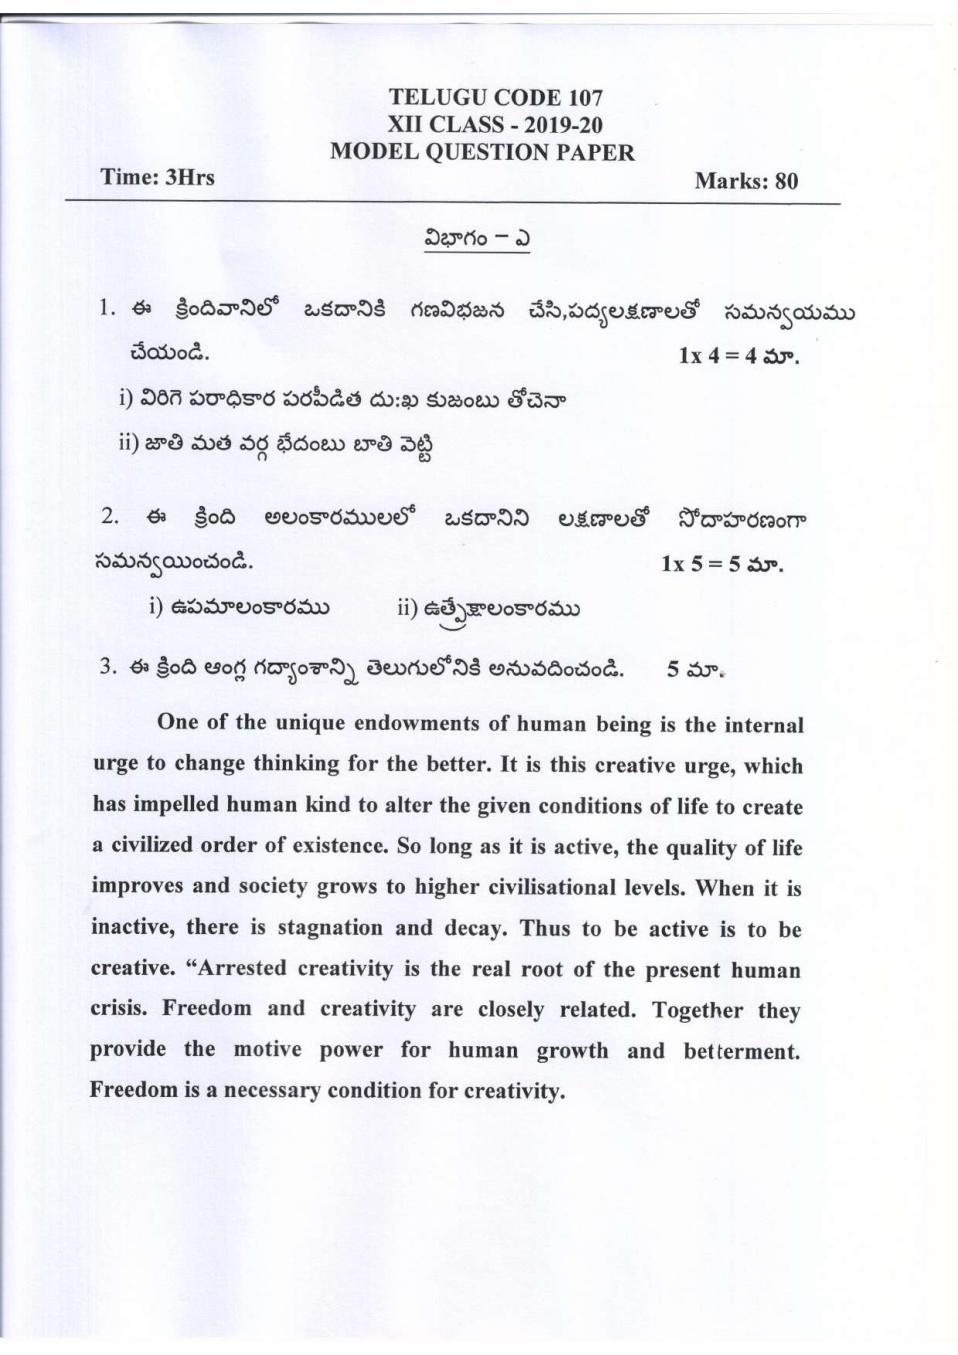 CBSE Class 12 Sample Paper 2020 for Telugu - Page 1